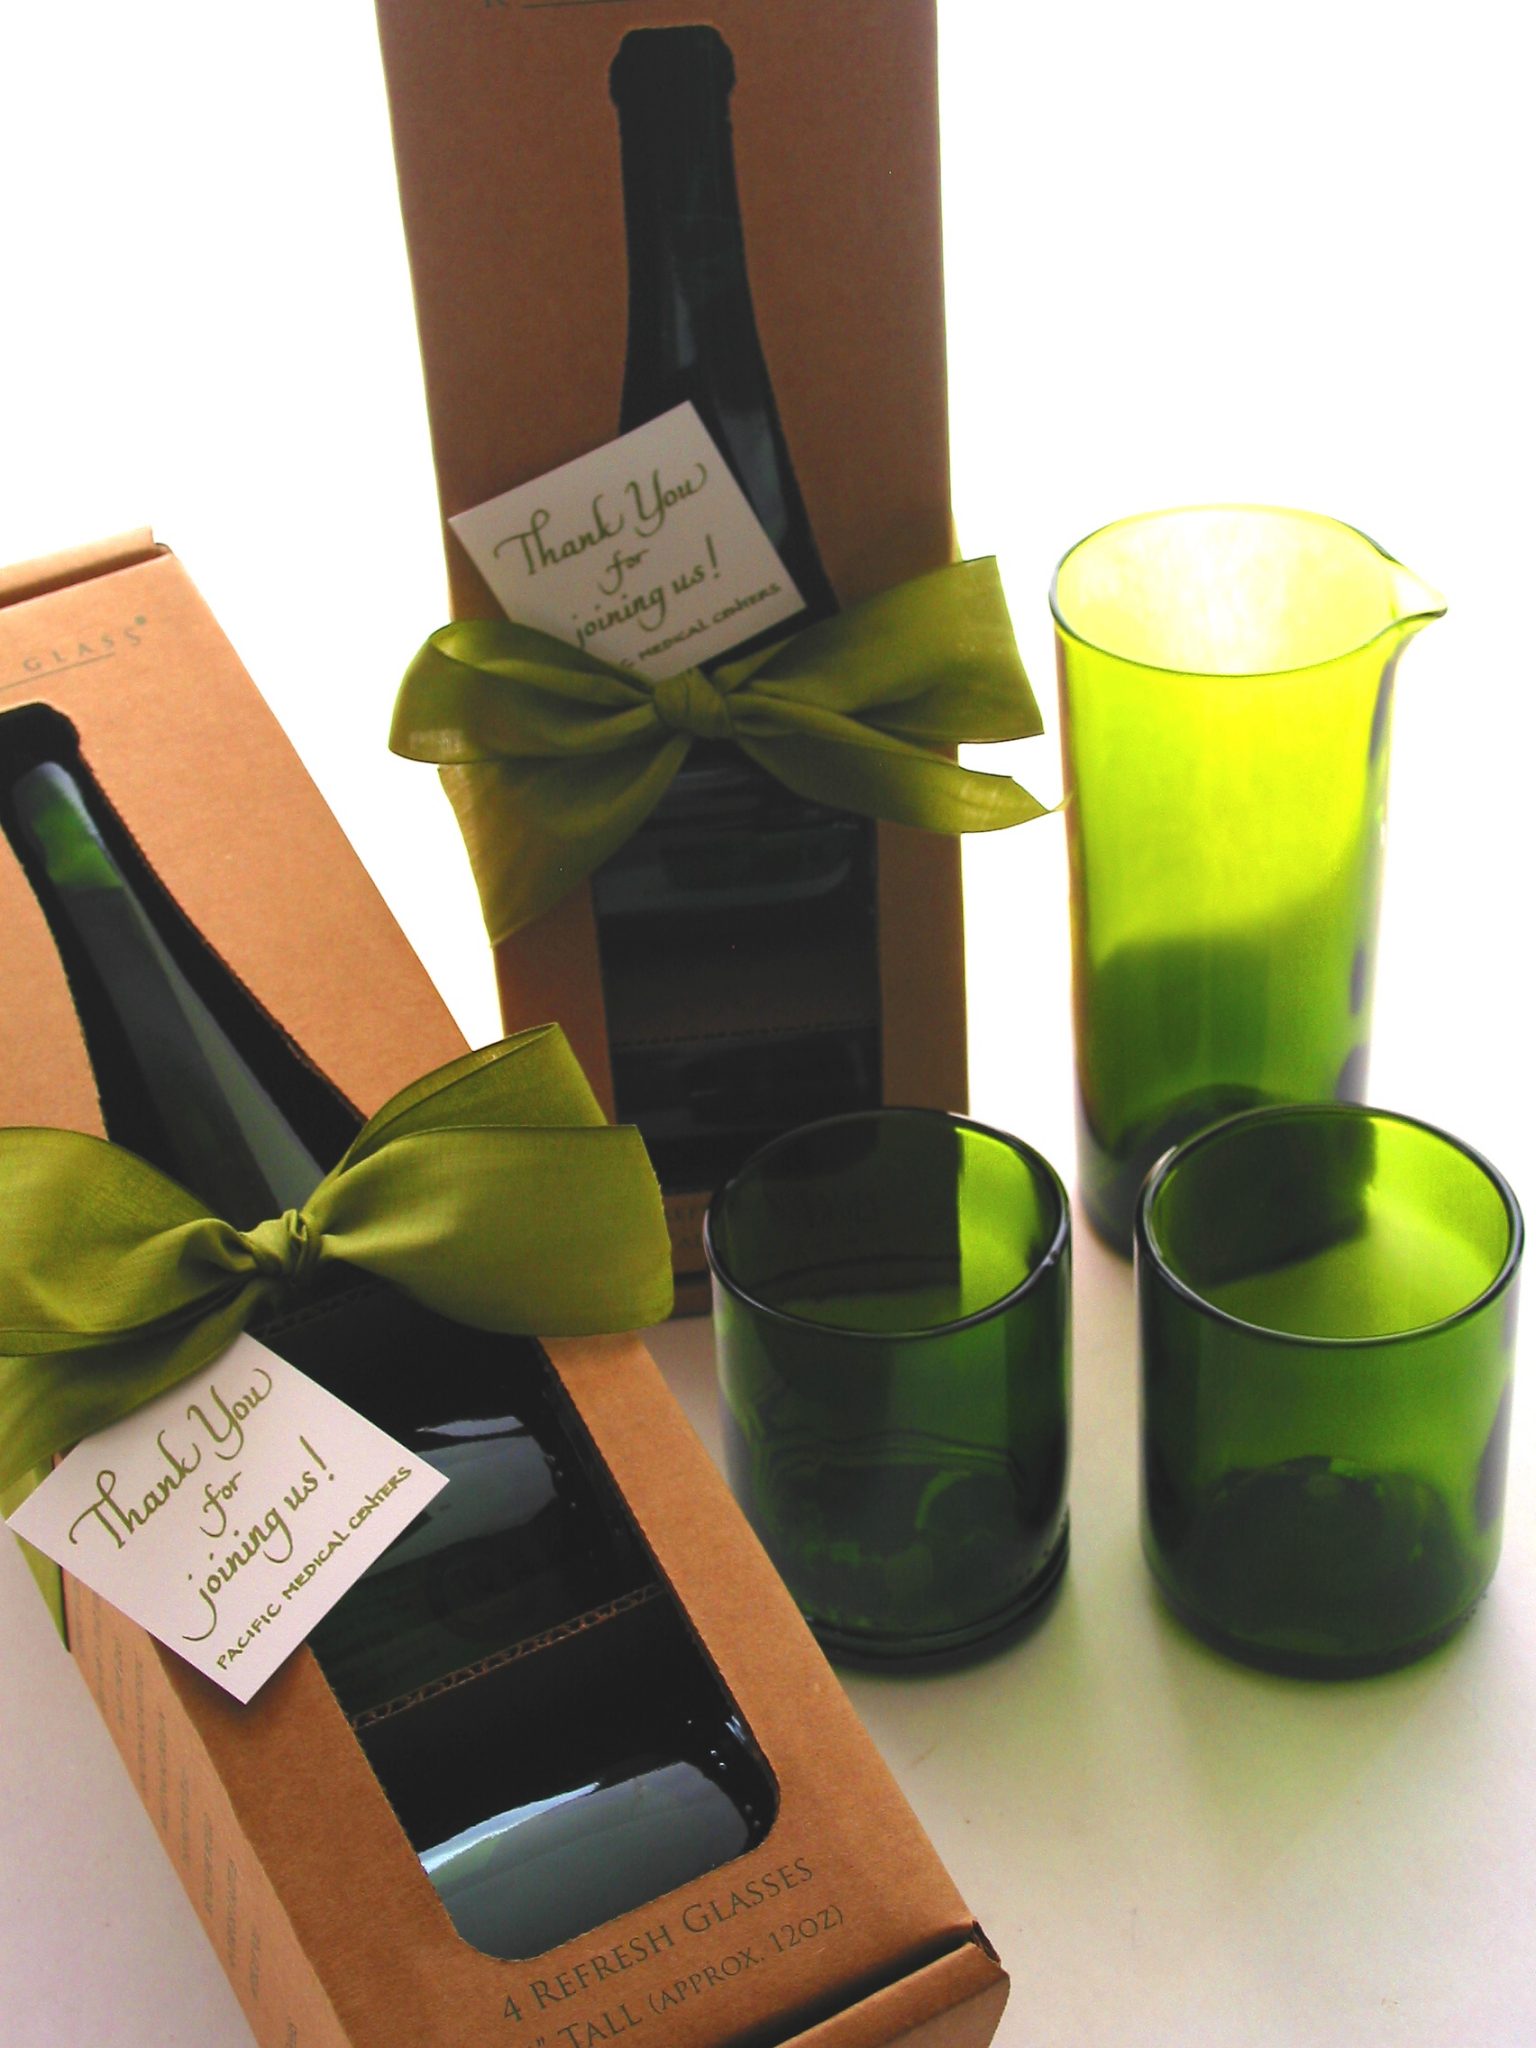 Custom Corporate Gifts, Eco-friendly Giftsbumble B design